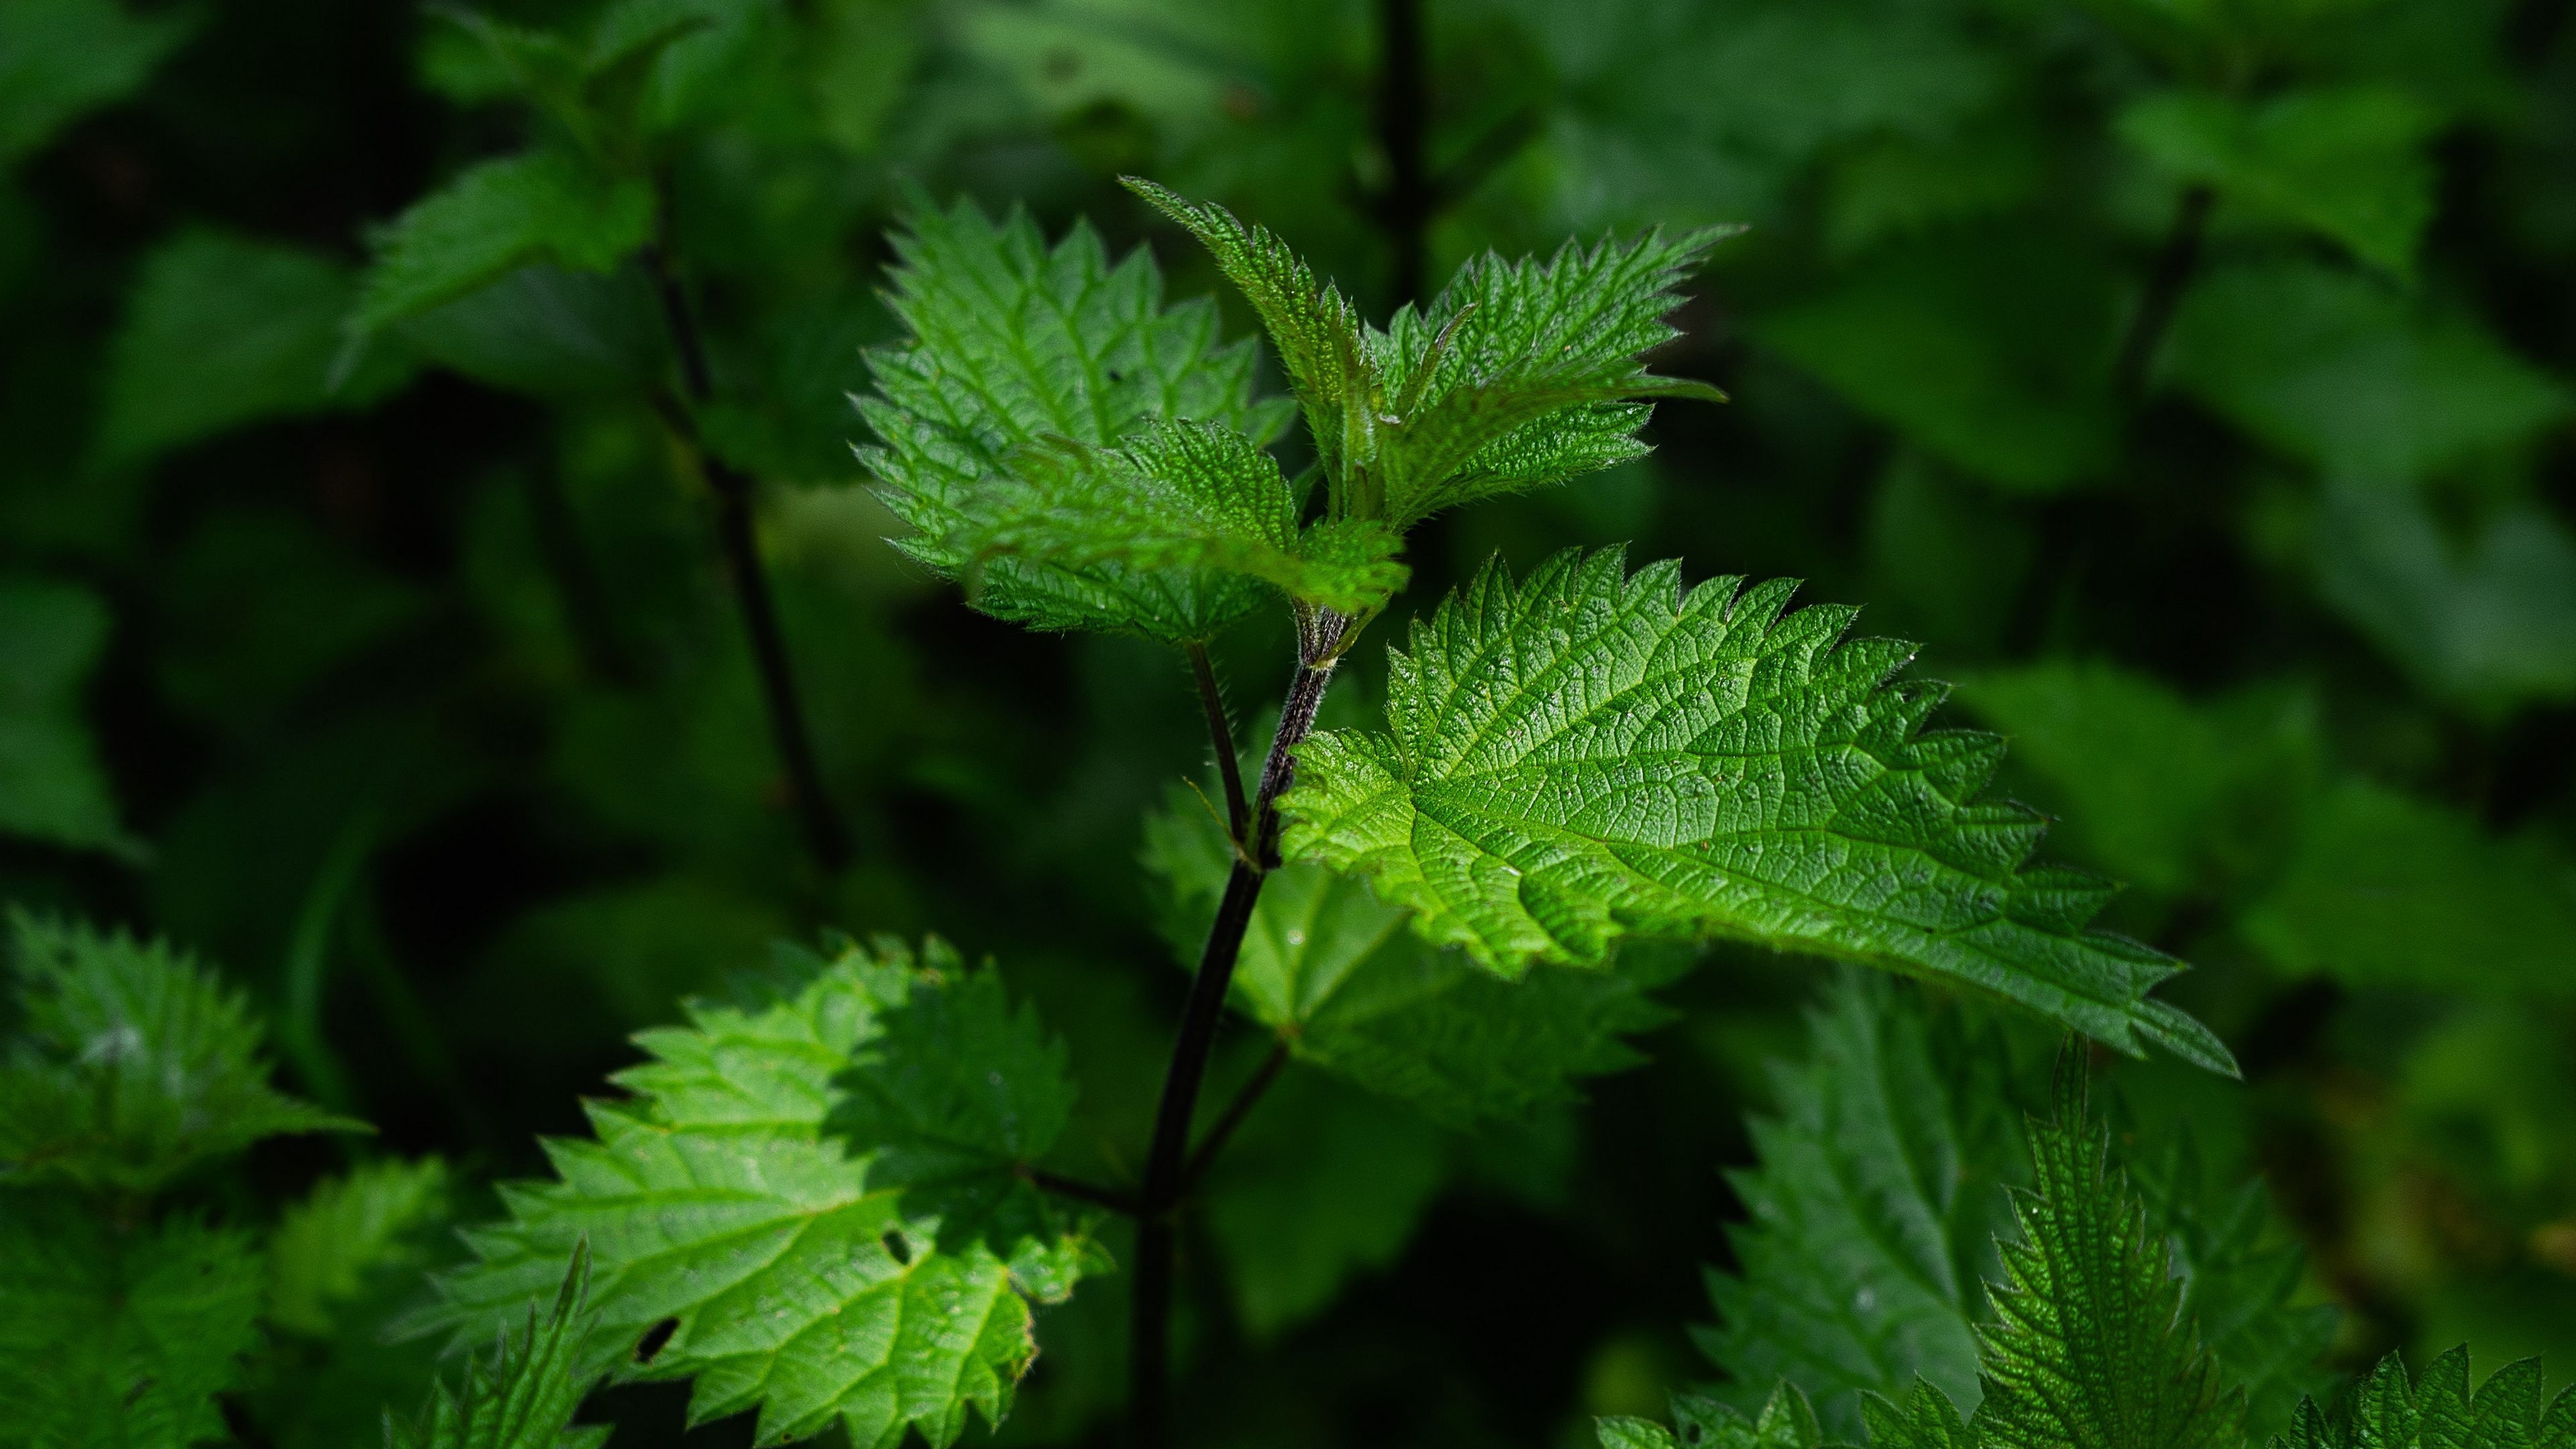 Nettle leaves, Lush greenery, Nature wallpapers, Holiday vibes, 3840x2160 4K Desktop